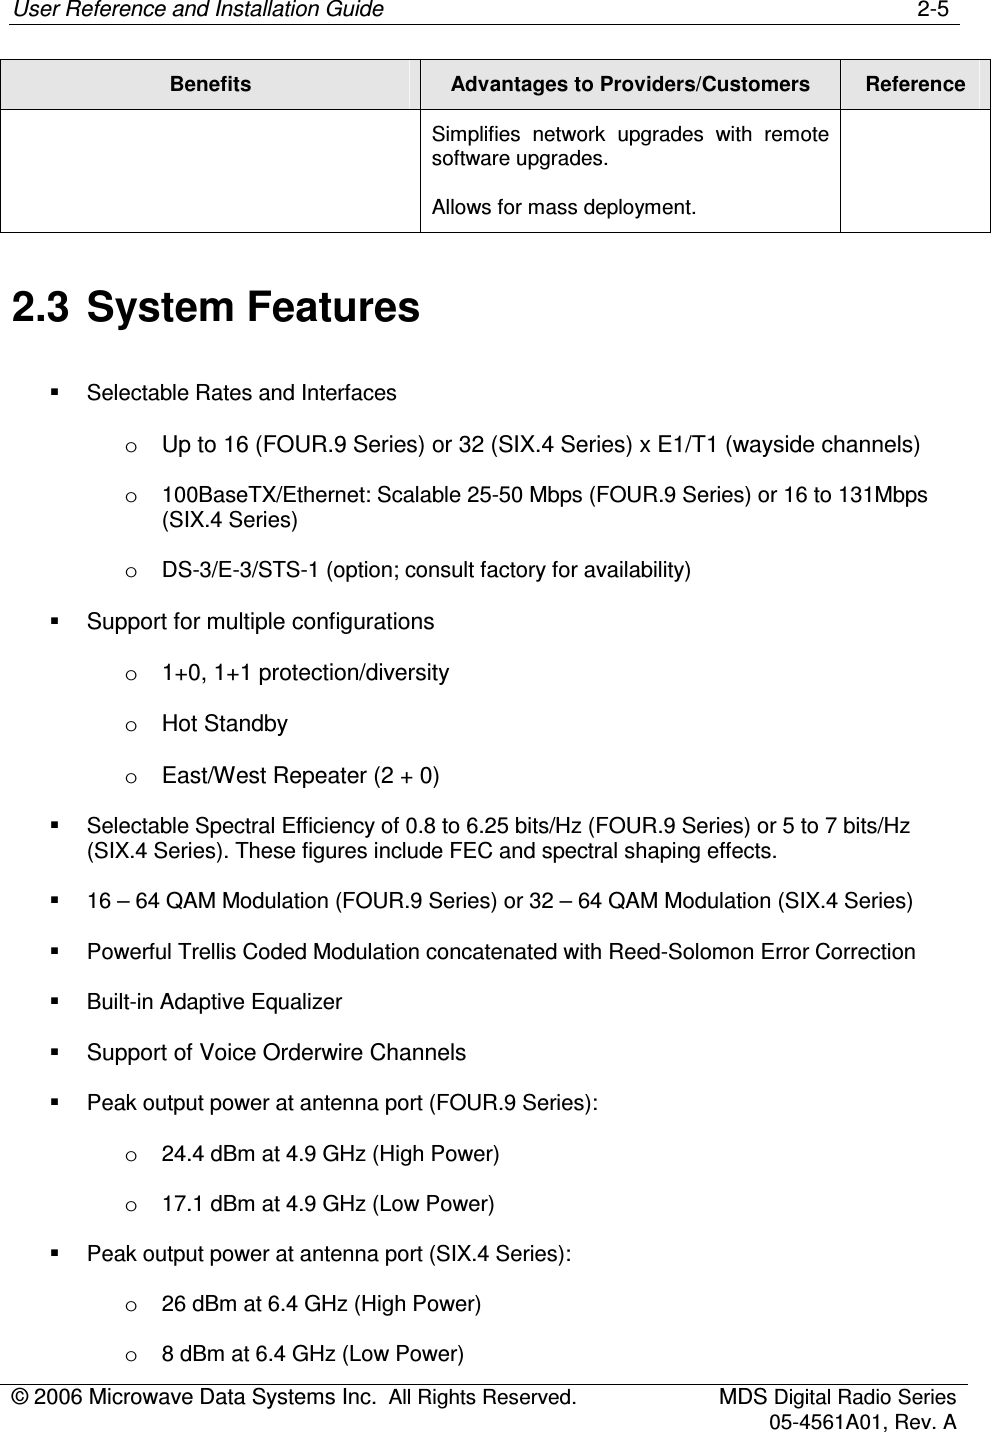 User Reference and Installation Guide    2-5 © 2006 Microwave Data Systems Inc.  All Rights Reserved.  MDS Digital Radio Series 05-4561A01, Rev. A  Benefits  Advantages to Providers/Customers  Reference Simplifies  network  upgrades  with  remote software upgrades. Allows for mass deployment. 2.3  System Features   Selectable Rates and Interfaces o  Up to 16 (FOUR.9 Series) or 32 (SIX.4 Series) x E1/T1 (wayside channels) o  100BaseTX/Ethernet: Scalable 25-50 Mbps (FOUR.9 Series) or 16 to 131Mbps (SIX.4 Series) o  DS-3/E-3/STS-1 (option; consult factory for availability)   Support for multiple configurations o  1+0, 1+1 protection/diversity o  Hot Standby o  East/West Repeater (2 + 0)   Selectable Spectral Efficiency of 0.8 to 6.25 bits/Hz (FOUR.9 Series) or 5 to 7 bits/Hz (SIX.4 Series). These figures include FEC and spectral shaping effects.   16 – 64 QAM Modulation (FOUR.9 Series) or 32 – 64 QAM Modulation (SIX.4 Series)   Powerful Trellis Coded Modulation concatenated with Reed-Solomon Error Correction    Built-in Adaptive Equalizer   Support of Voice Orderwire Channels   Peak output power at antenna port (FOUR.9 Series): o  24.4 dBm at 4.9 GHz (High Power) o  17.1 dBm at 4.9 GHz (Low Power)   Peak output power at antenna port (SIX.4 Series): o  26 dBm at 6.4 GHz (High Power) o  8 dBm at 6.4 GHz (Low Power) 